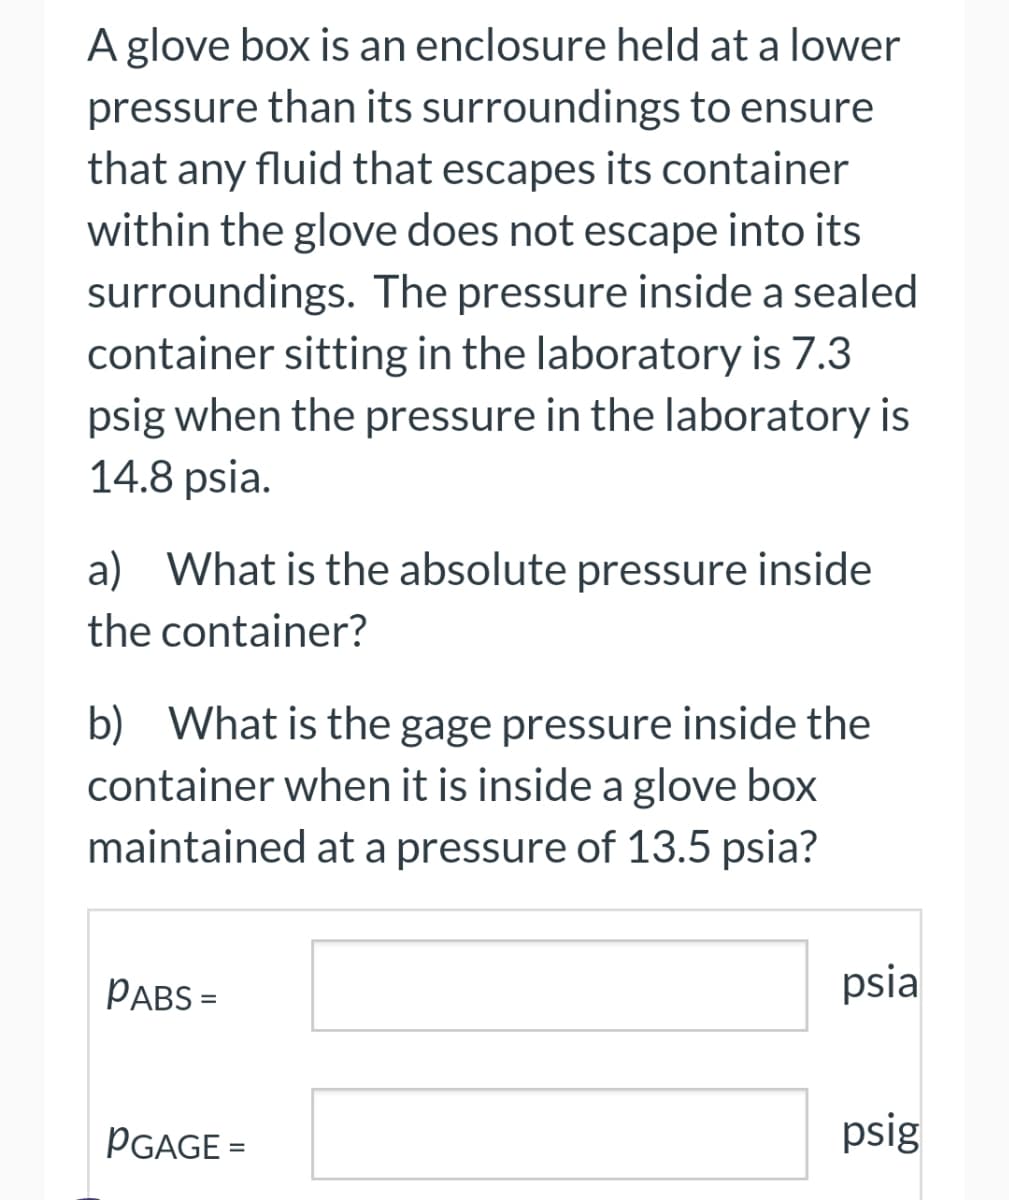 A glove box is an enclosure held at a lower
pressure than its surroundings to ensure
that any fluid that escapes its container
within the glove does not escape into its
surroundings. The pressure inside a sealed
container sitting in the laboratory is 7.3
psig when the pressure in the laboratory is
14.8 psia.
a) What is the absolute pressure inside
the container?
b) What is the gage pressure inside the
container when it is inside a glove box
maintained at a pressure of 13.5 psia?
PABS =
PGAGE=
psia
psig